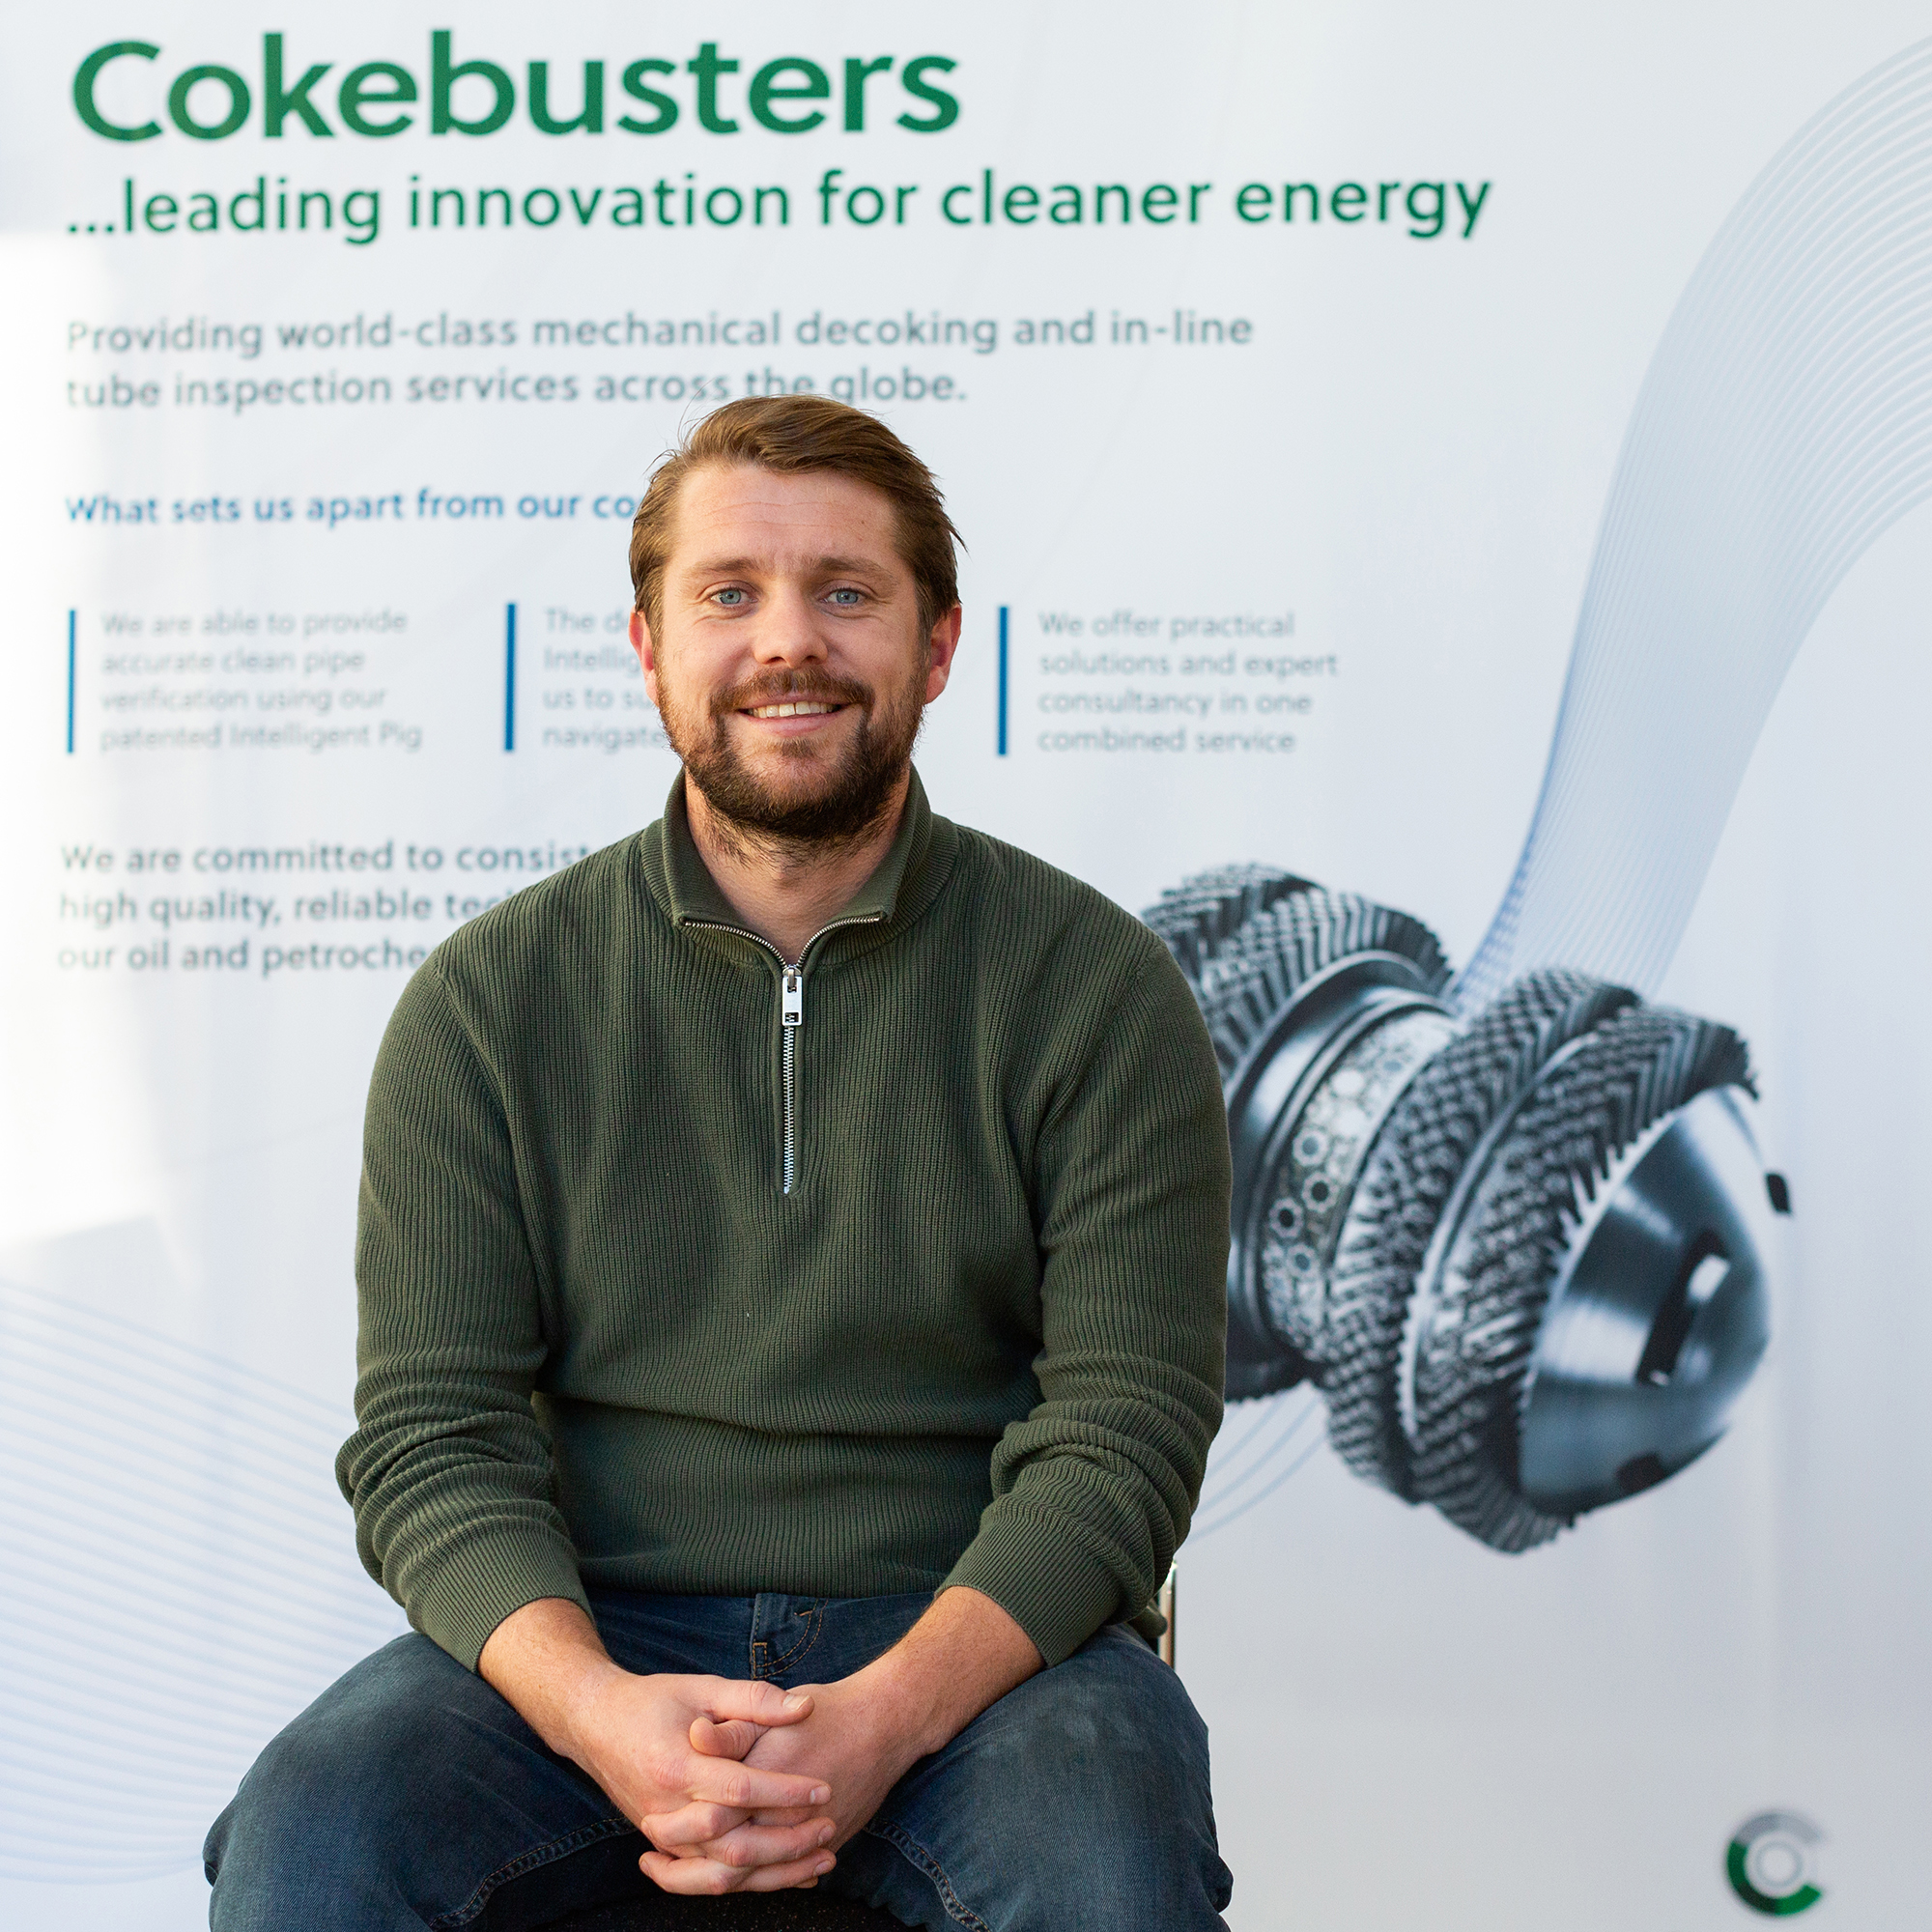 Cokebusters Director of Technology Nick Bettley